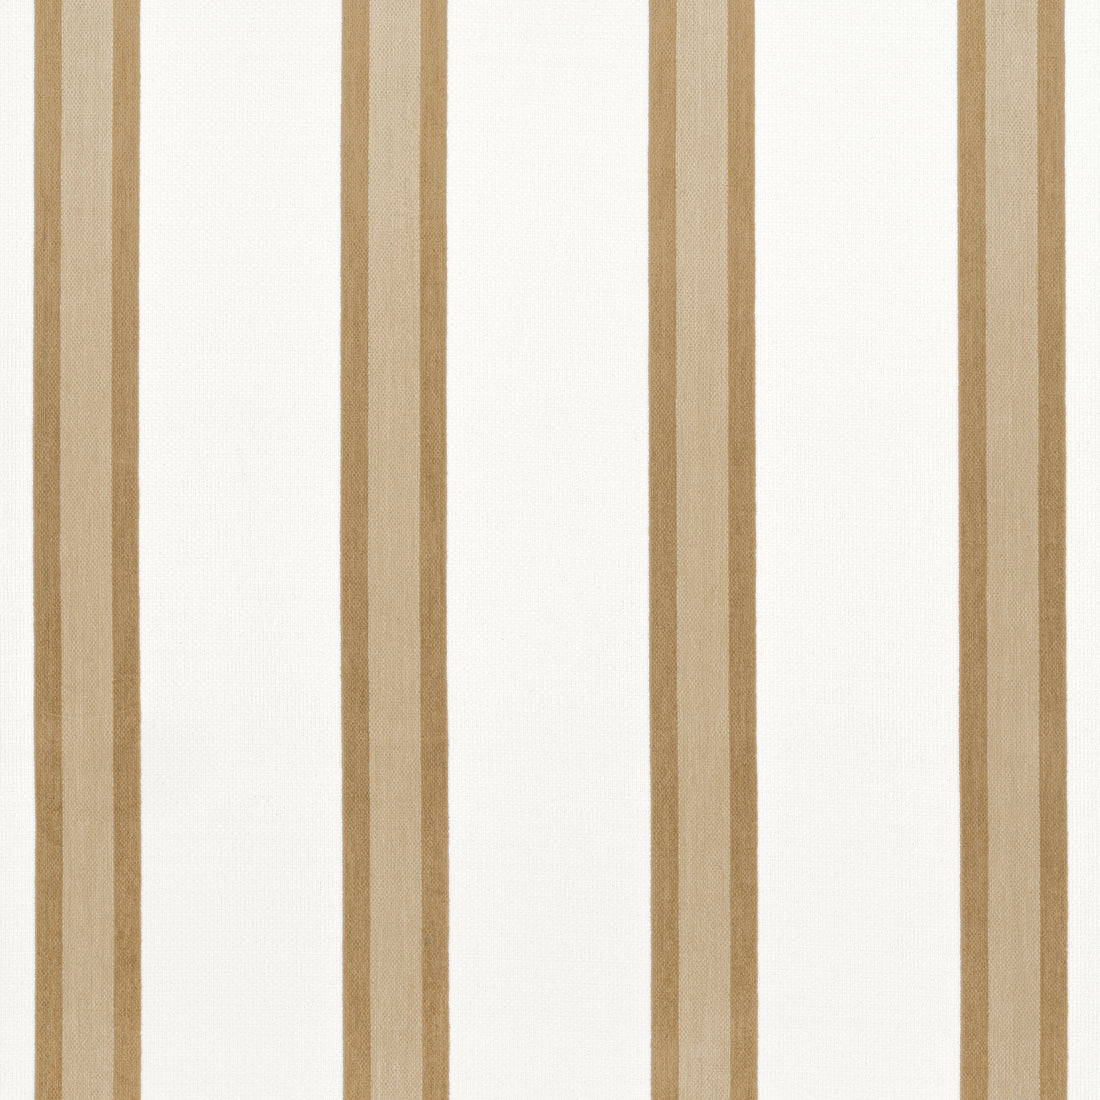 Abito Stripe fabric in camel color - pattern number W77146 - by Thibaut in the Veneto collection